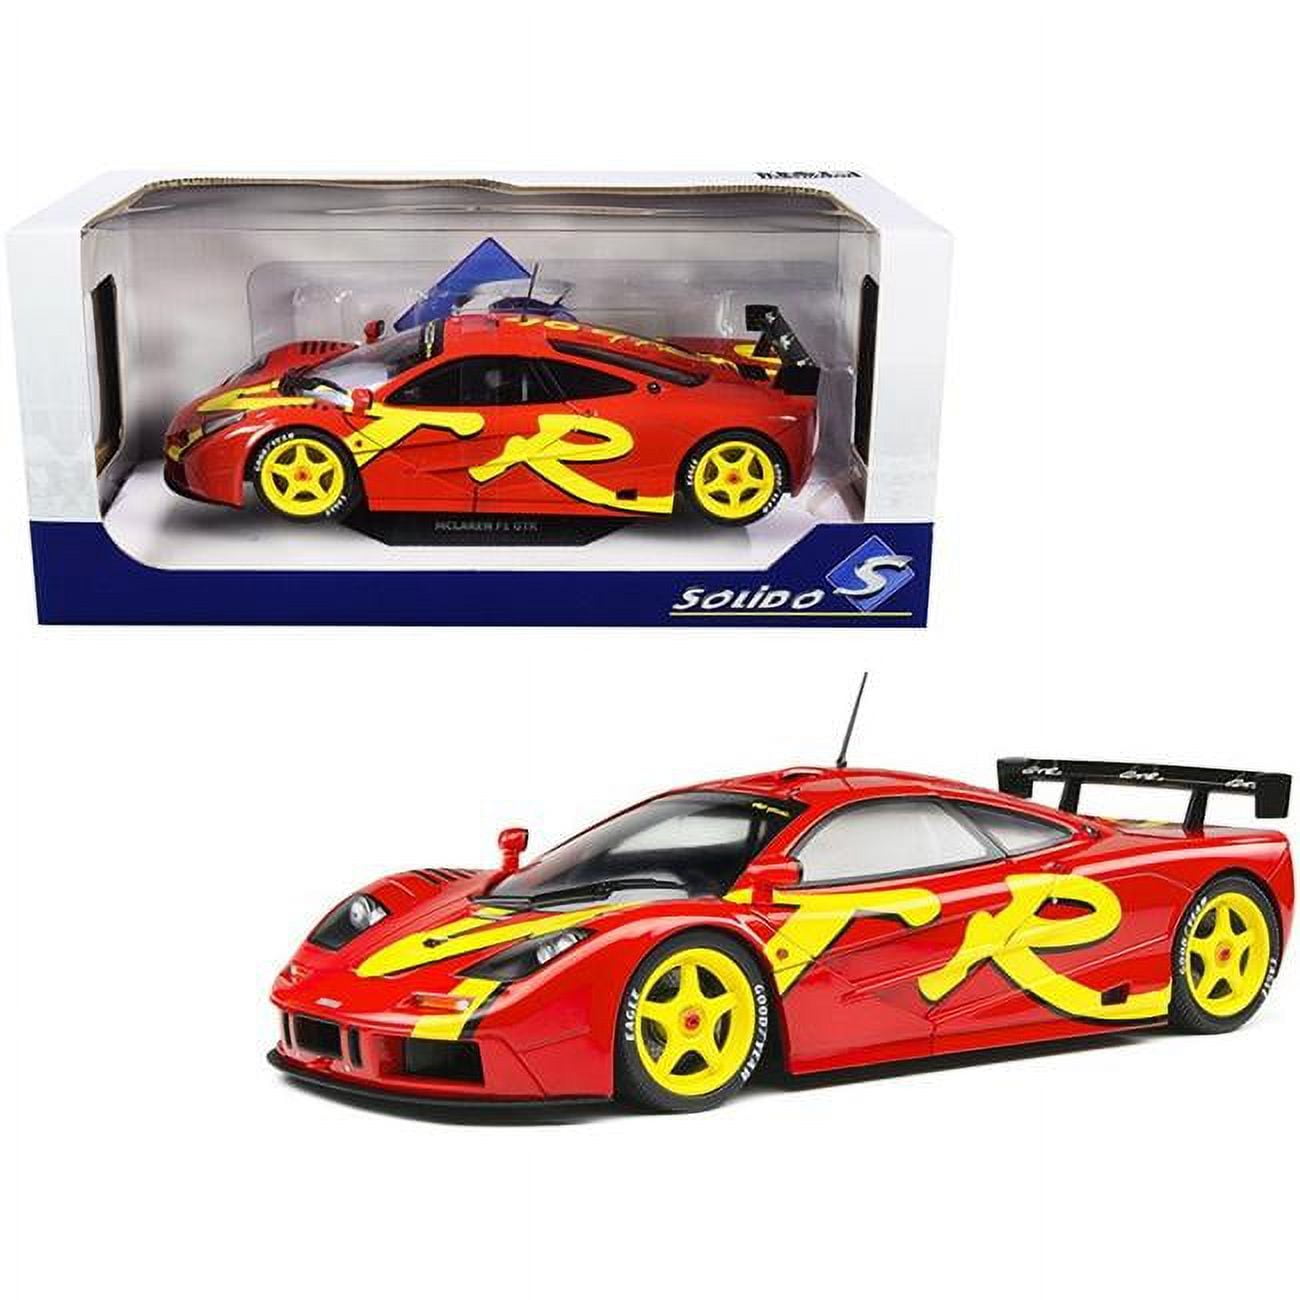 Picture of Solido S1804102 1-18 Diecast Model Car for 1996 McLaren F1 GTR Short Tail Launch Livery Red with Yellow Graphics